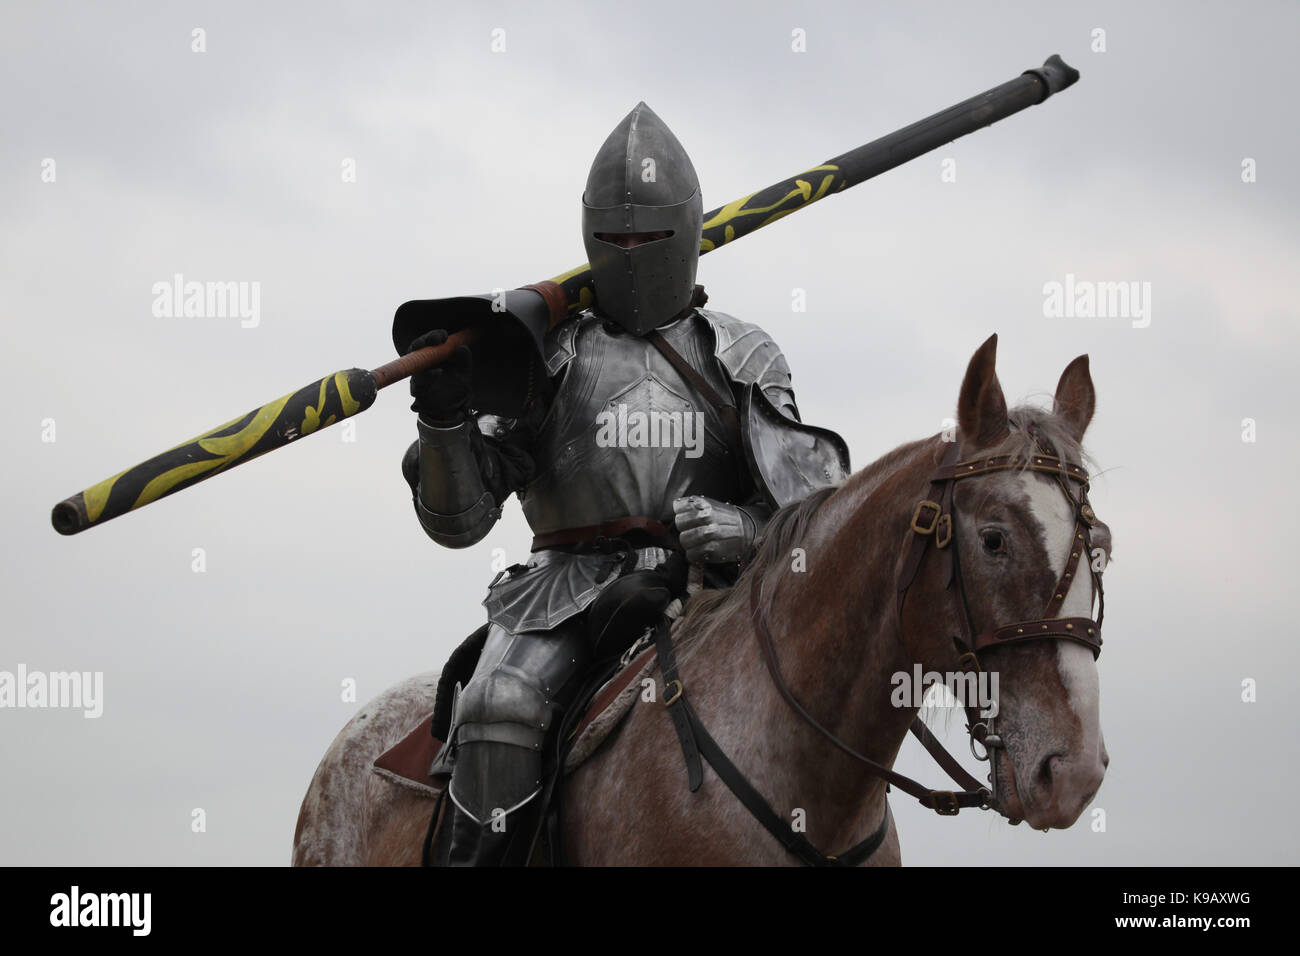 Czech actor Michal Bednář dressed as a medieval knight rides a horse during the filming of the new German film 'Die Ritter' ('The Knights') directed by Carsten Gutschmidt by order of ZDF in Milovice in Central Bohemia, Czech Republic in 23 October 2013. Stock Photo